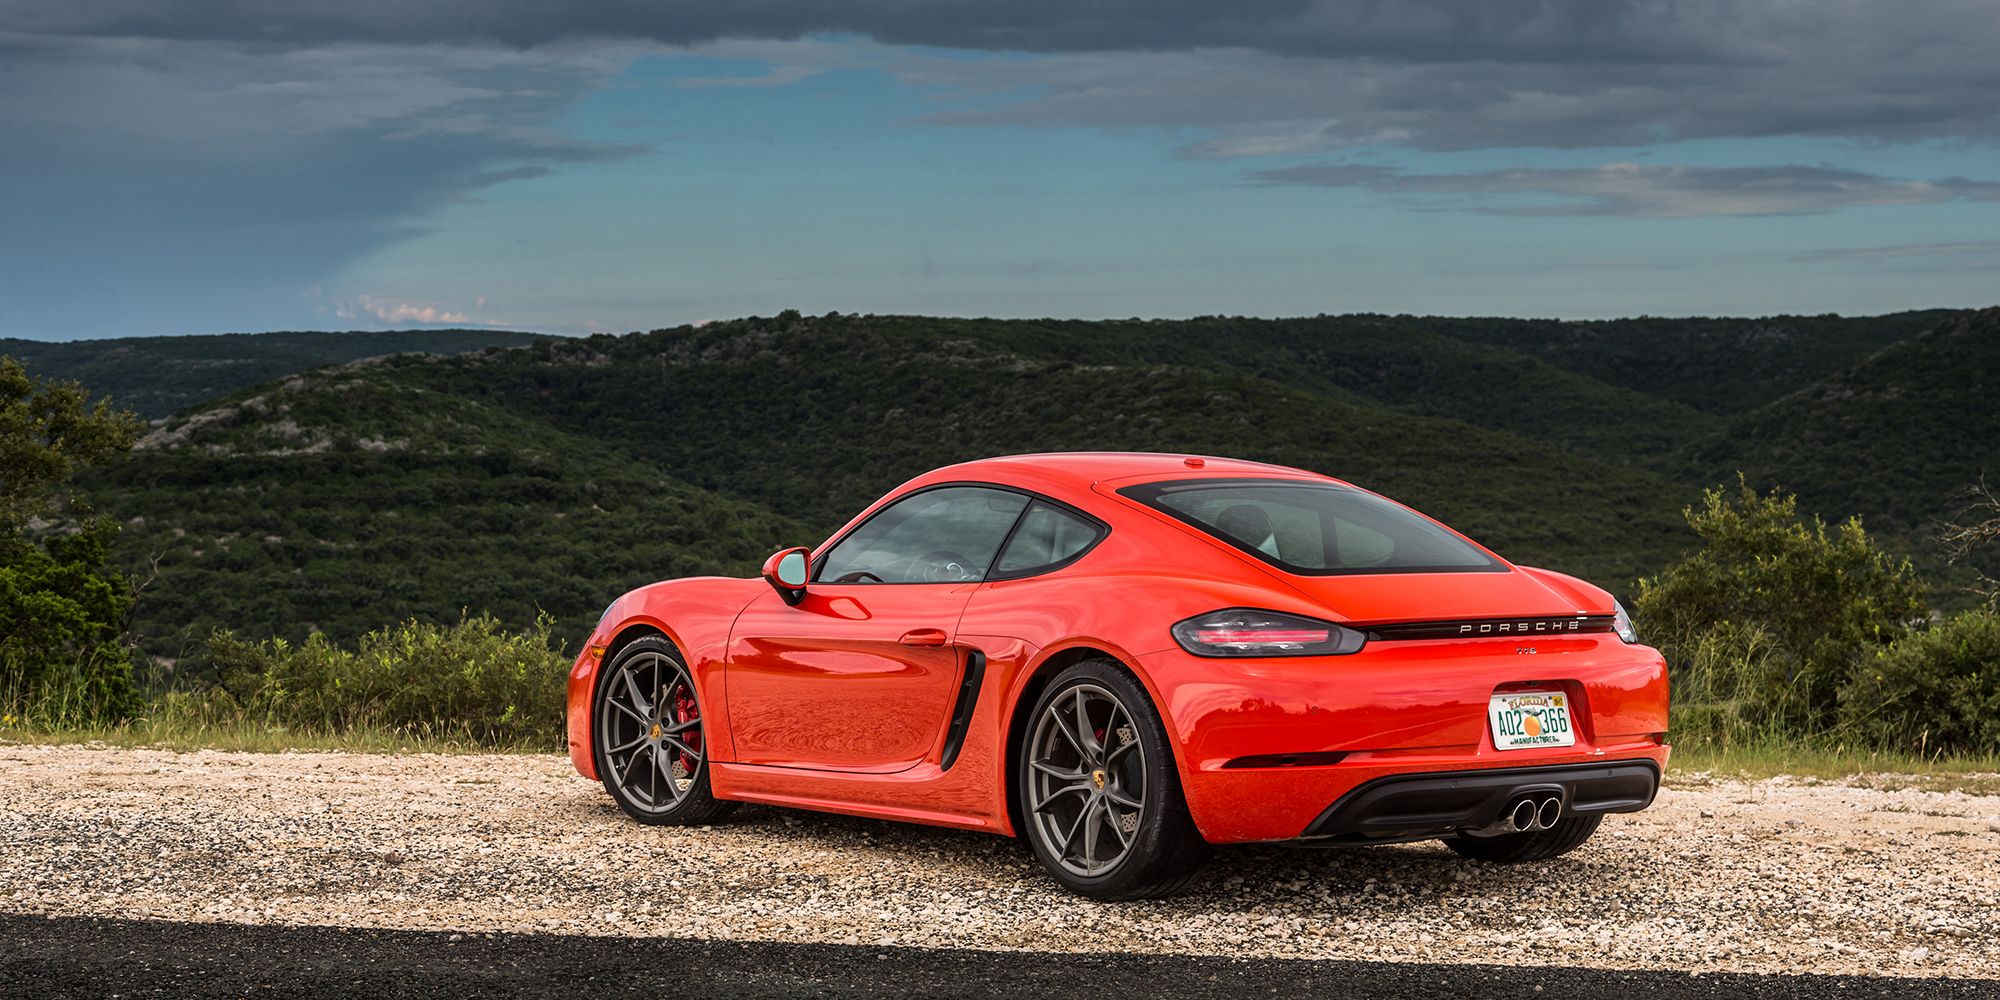 The rear of the 718 Cayman S